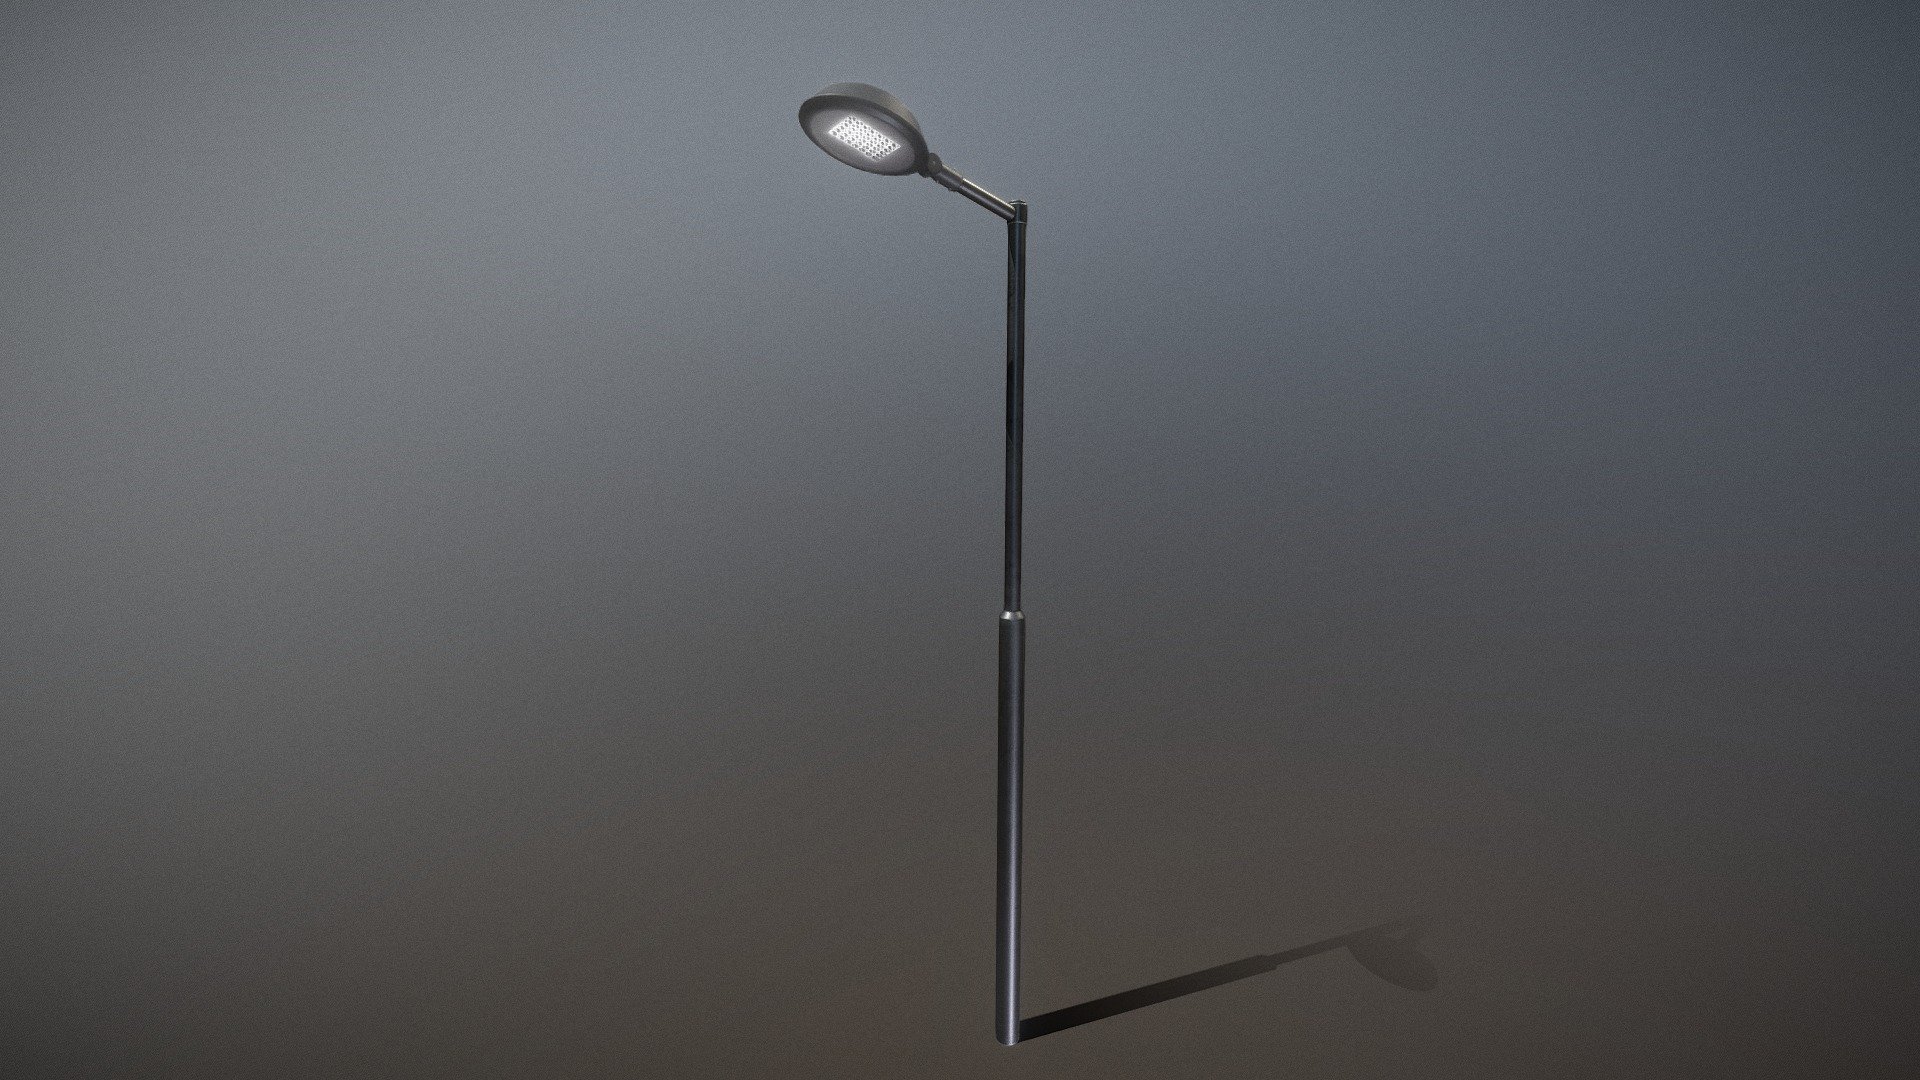 Street Light 15 version 1 (3m) with pole 3.




one object

Vertices = 1576

Edges = 4183

Polygons = 2620

object dimension 1.011m x 0.480m x 4.262m

object rotation and location is 0, scale is 1.000 x 1.000 x 1.000

two PBR material with 4k textures

texture types: Base Color, Normal, Metalness, Roughness



Here are some other street lights: 




Street Light 11 (Low-Poly Version 1)

Street Light (2) Wall-Version (High-Poly) 

Street Light (3) (Low-Poly Version) 

Street Light (4) (High-Poly Version) 

Street Light (5) High-Poly Version

Street Light (7) Galvanized Iron Version

All Street Light



Modeled and textured by 3DHaupt in Blender-2.90 - Street Light 15 v.1 (3m) (Pole 3) - Buy Royalty Free 3D model by VIS-All-3D (@VIS-All) 3d model